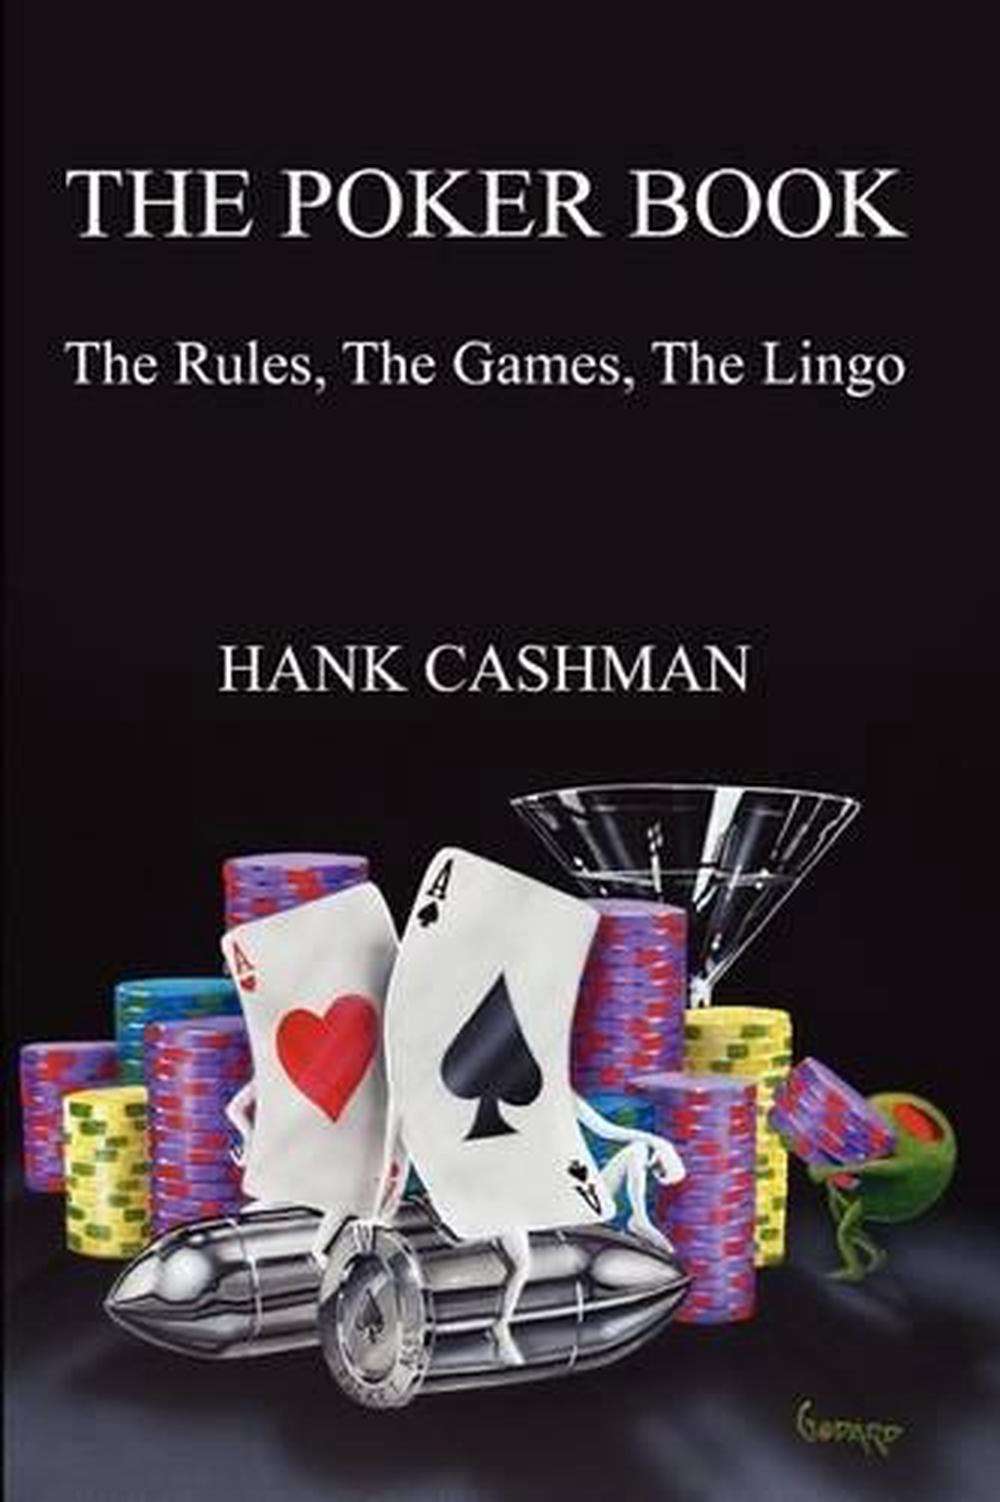 The Poker Book: The Rules the Games the Lingo by Hank Cashman